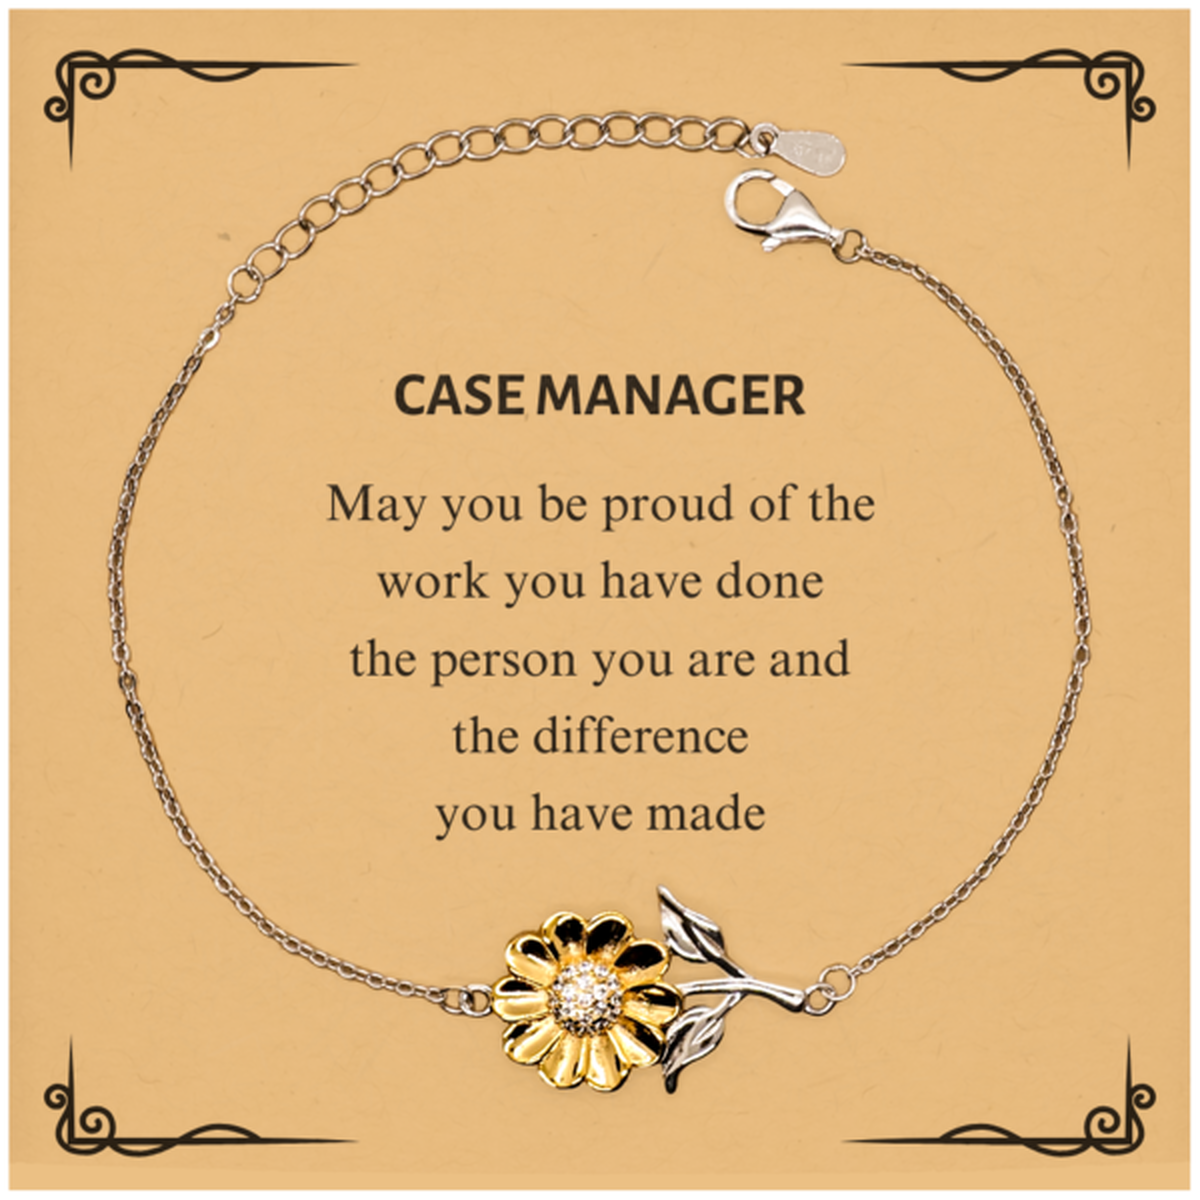 Case Manager May you be proud of the work you have done, Retirement Case Manager Sunflower Bracelet for Colleague Appreciation Gifts Amazing for Case Manager